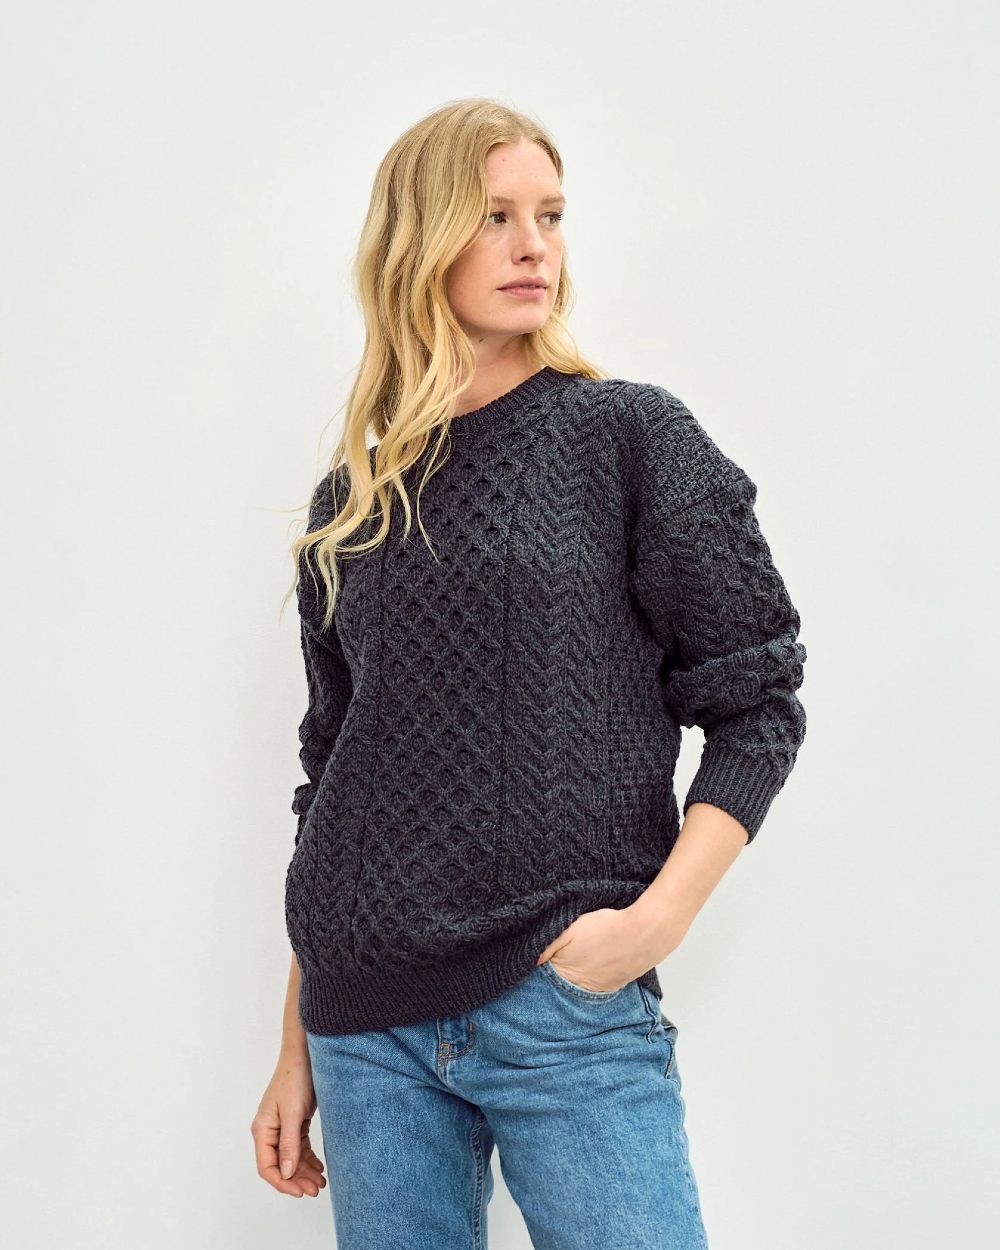 Aran Inisheer Traditional Sweater in Charcoal 